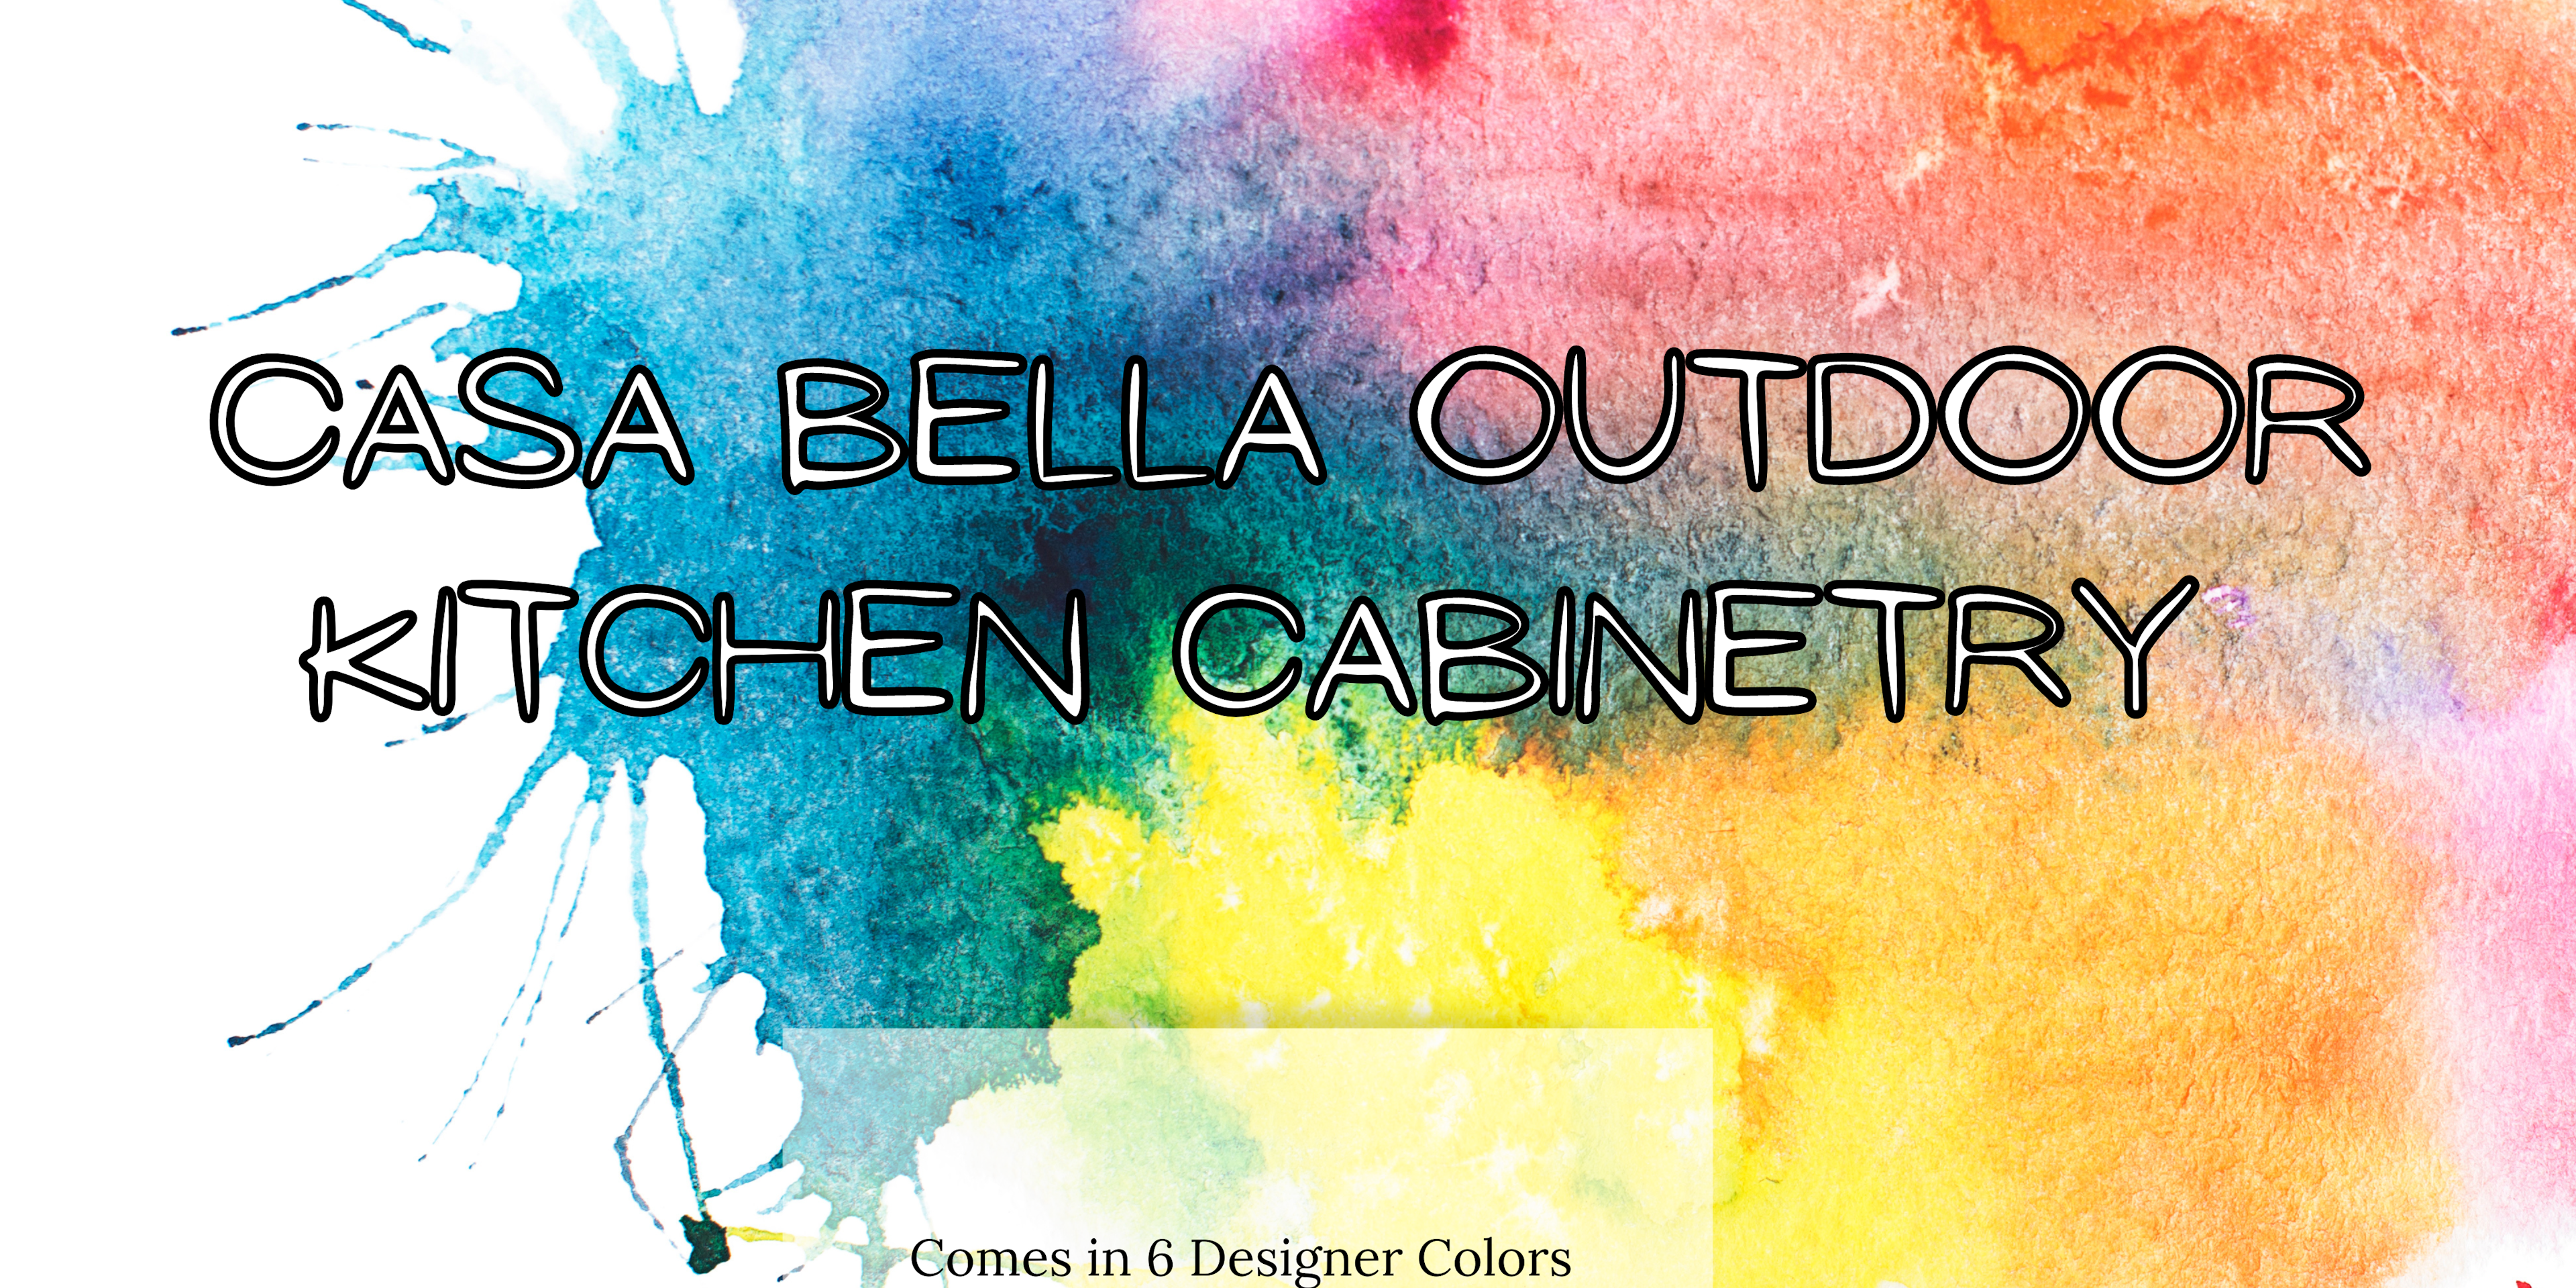 Experience Outdoor Culinary Excellence with Casa Bella Outdoor Kitchens